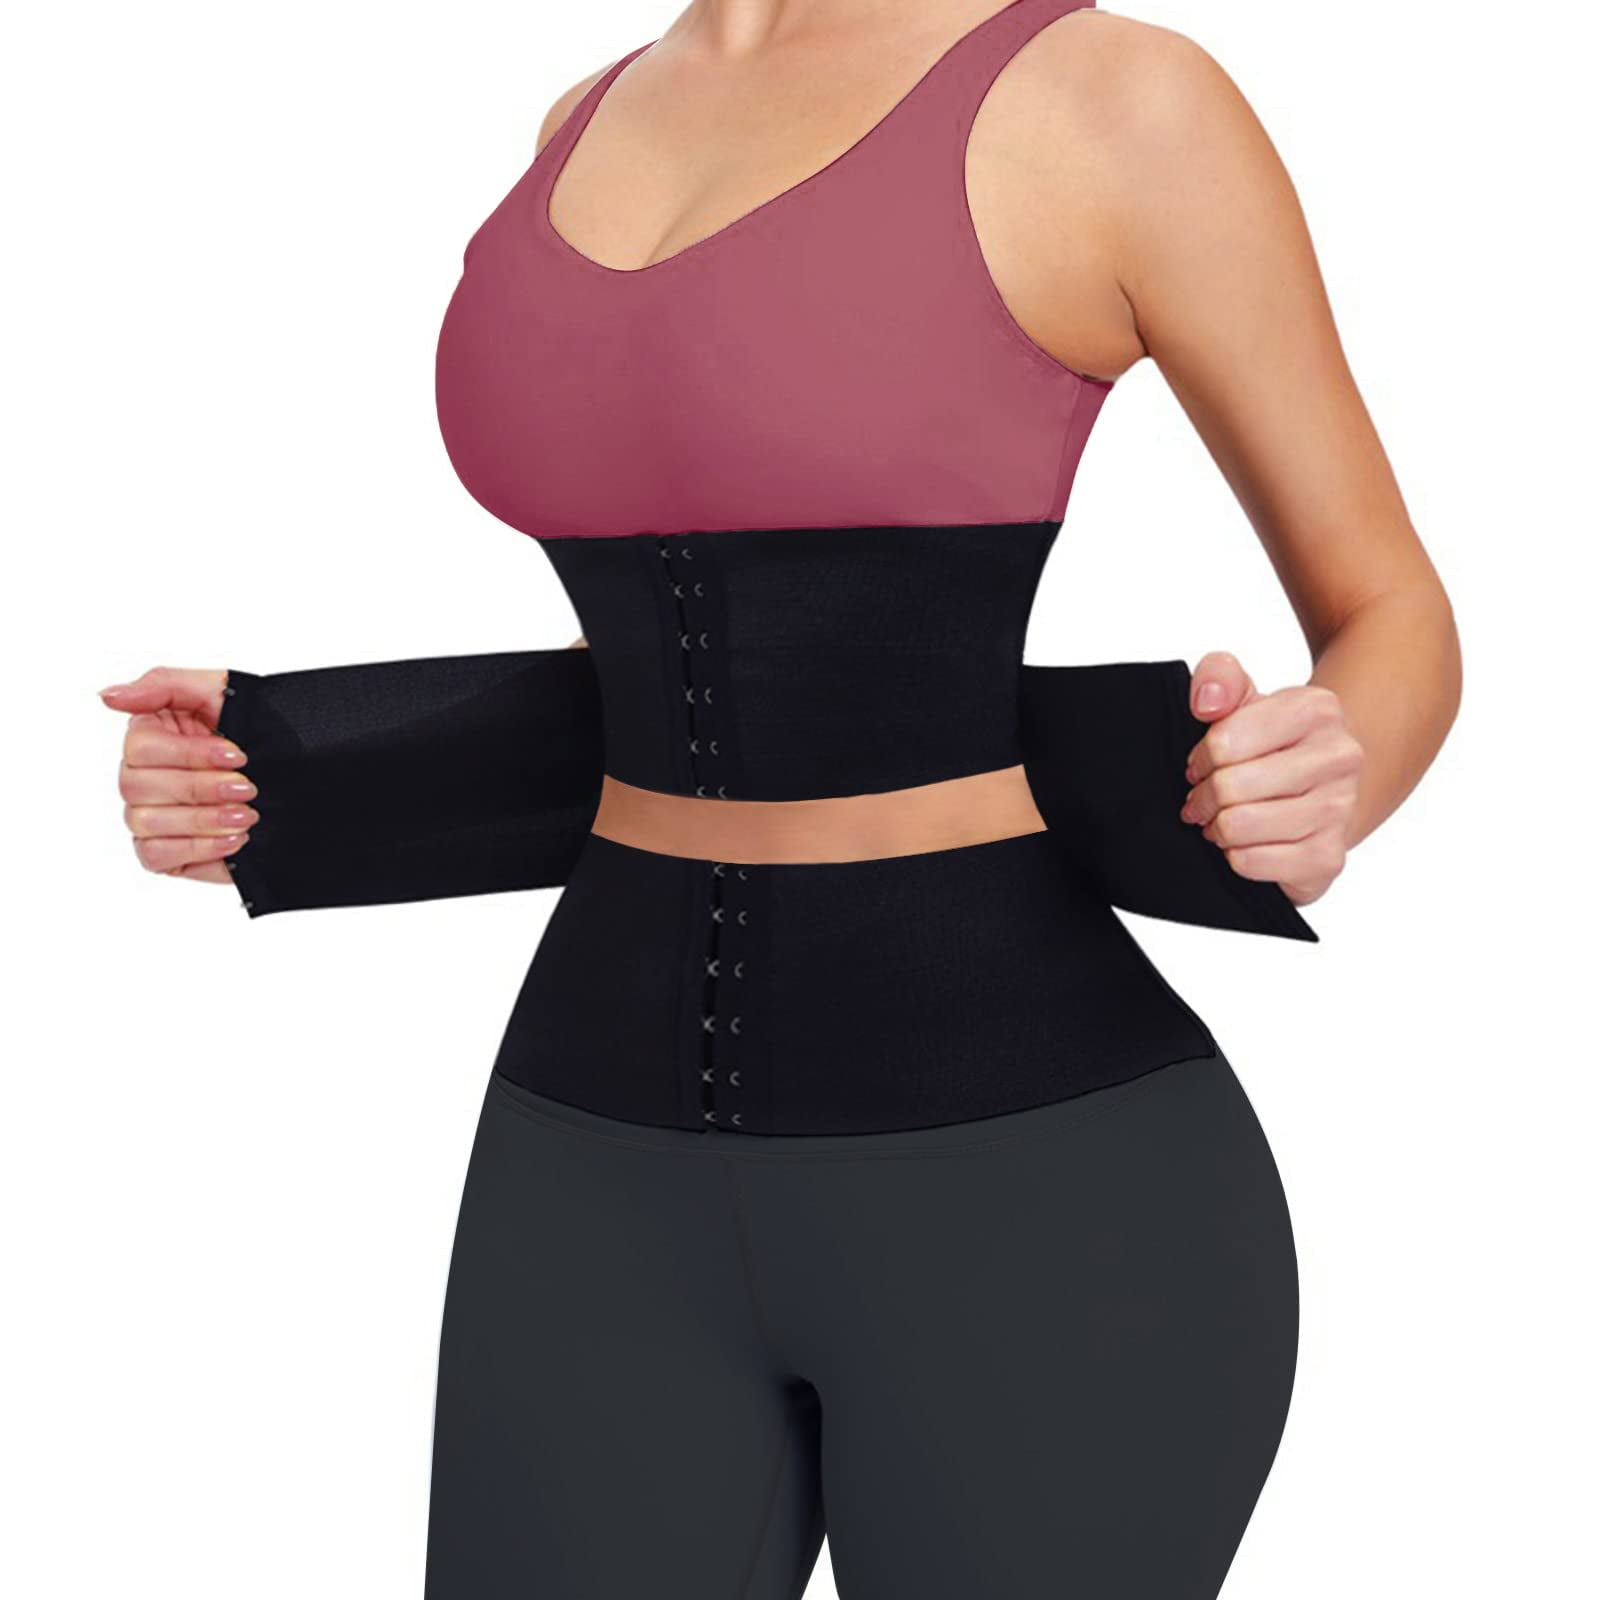 Fashion (YDS5130-B,)LAZAWG Waist Trainer for Women Hot Sweat Tummy Control  Belt Weight Loss Belly Band Fitness Girdle Slimming Lady Body Shaper Gym  MAA @ Best Price Online